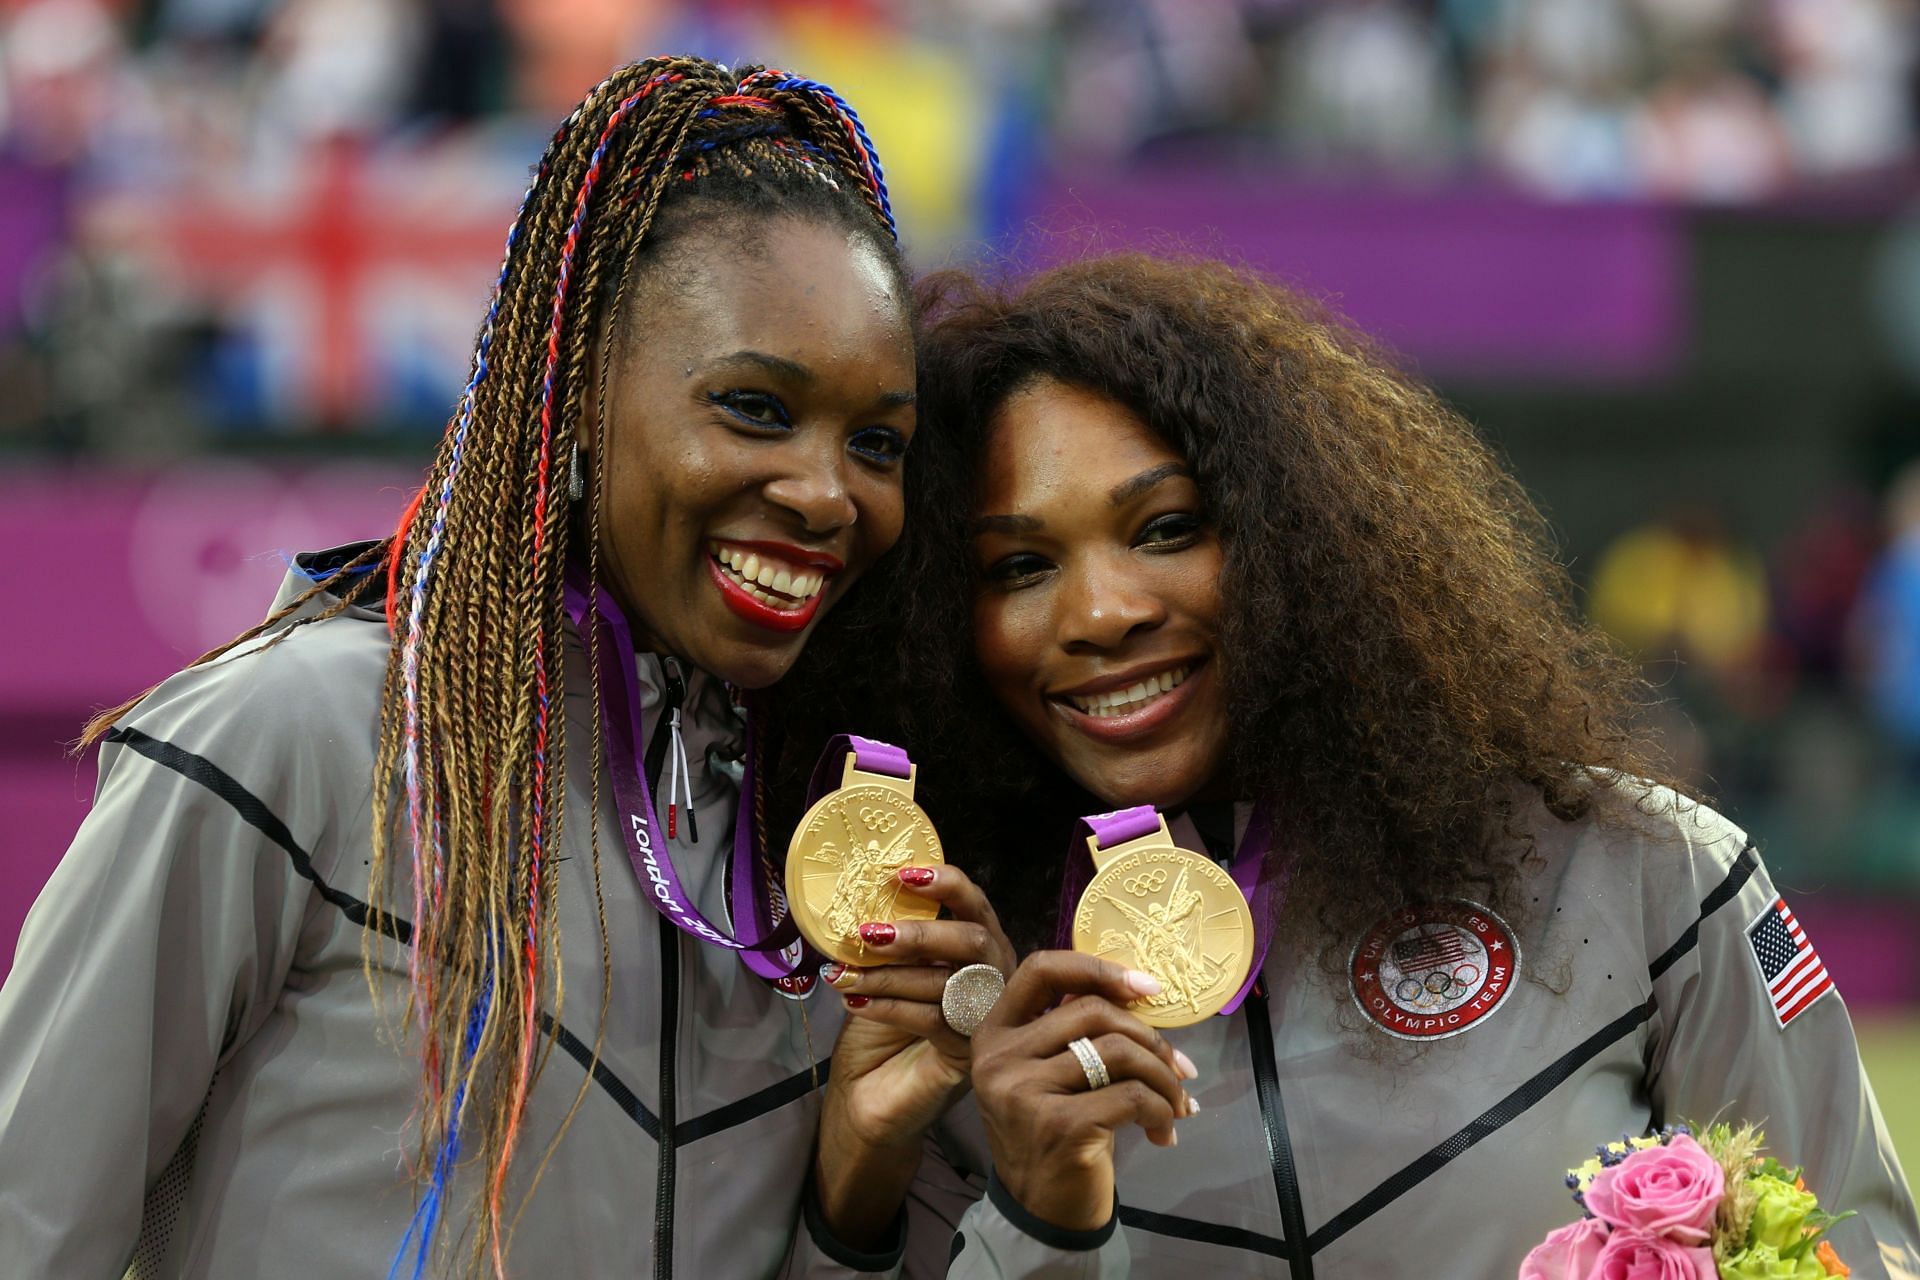 Venus and Serena Williams won gold in doubles at the London Olympics